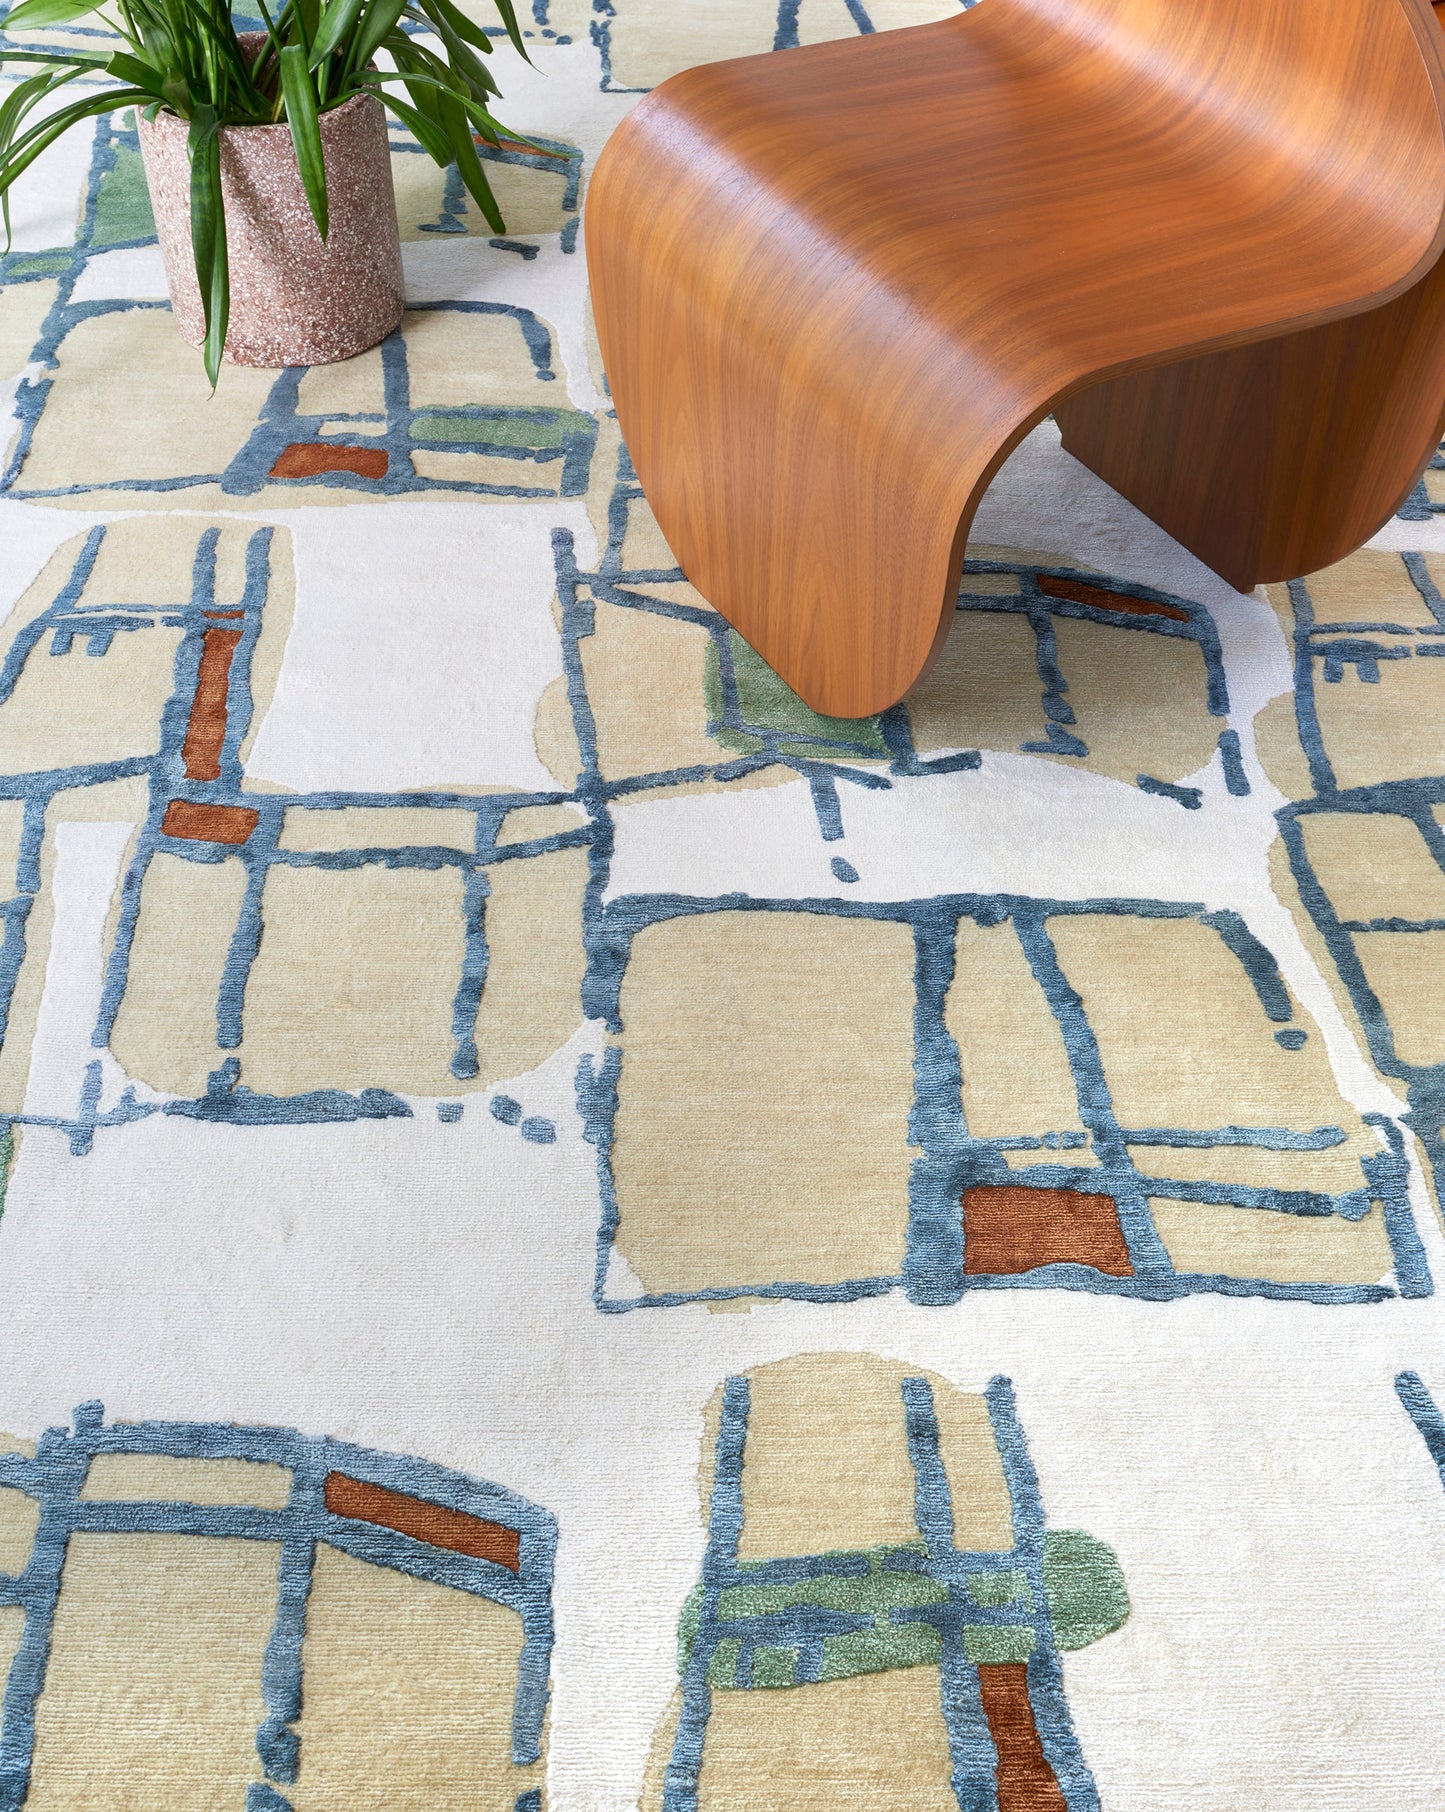 A Quotidiana Hand Knotted Rug Isthmus with an abstract pattern enhances the design process by complementing the wooden chair and a potted plant